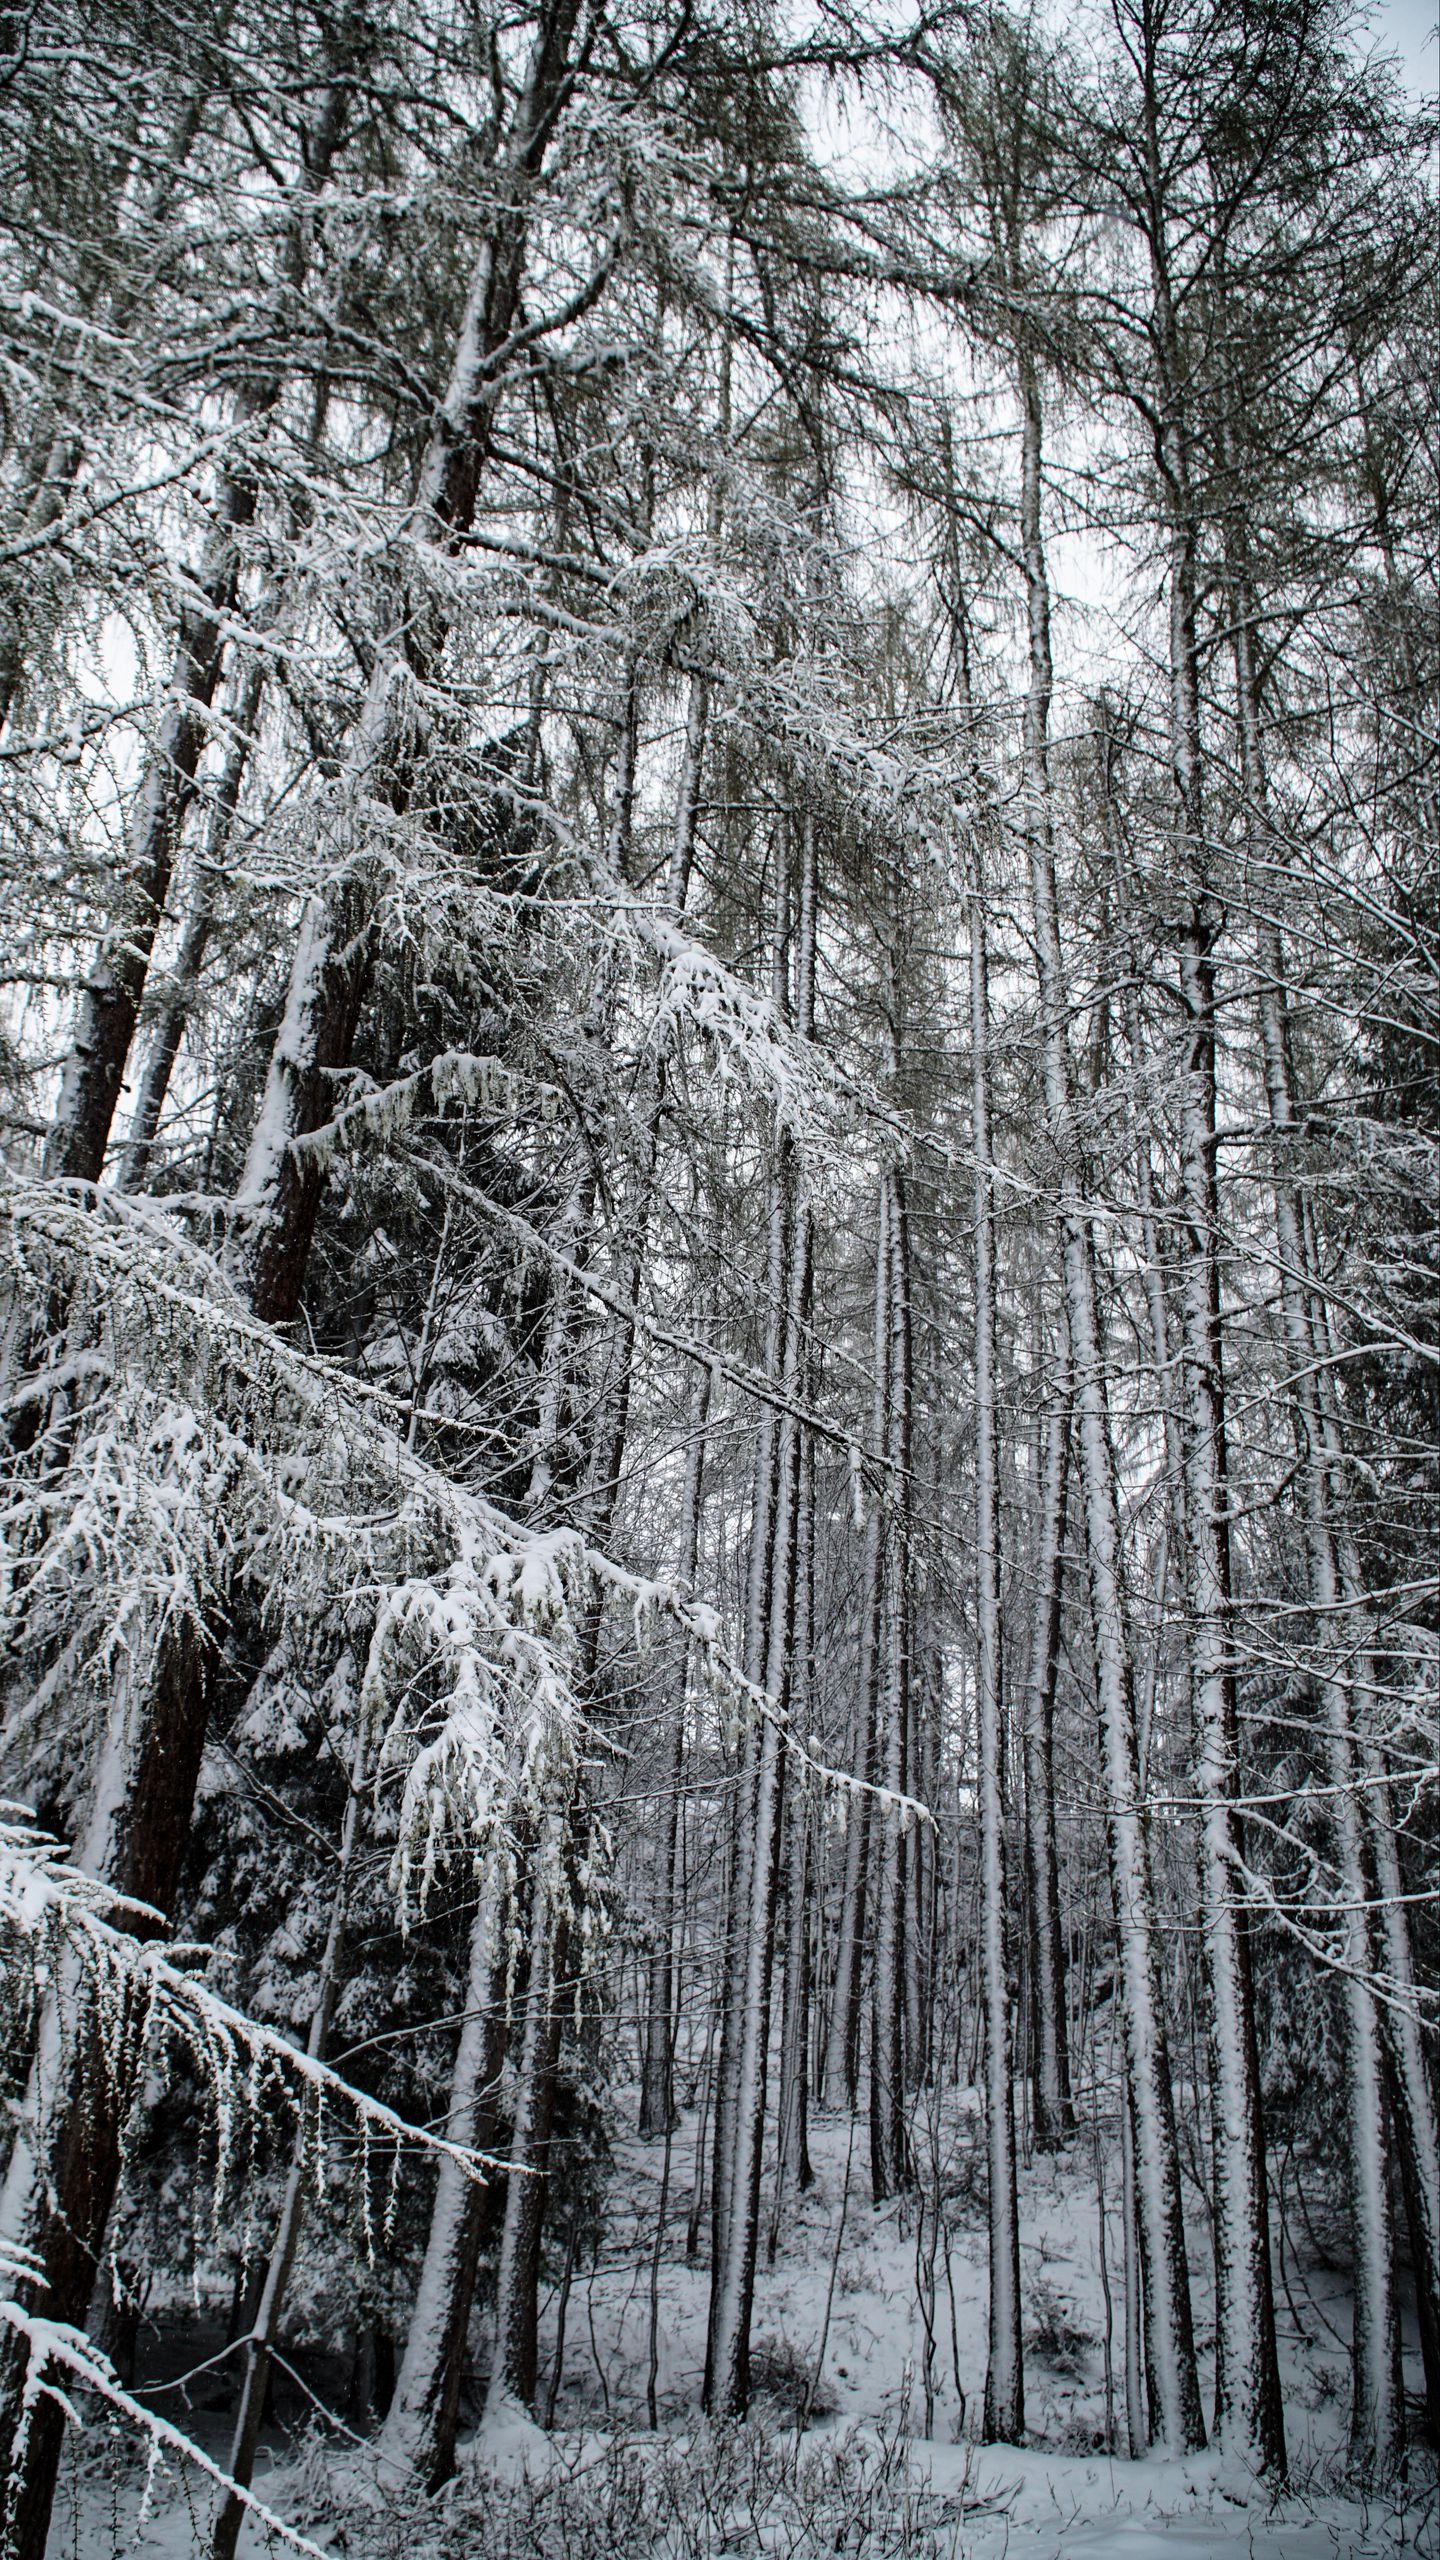 A snow covered forest with trees and branches - Woods